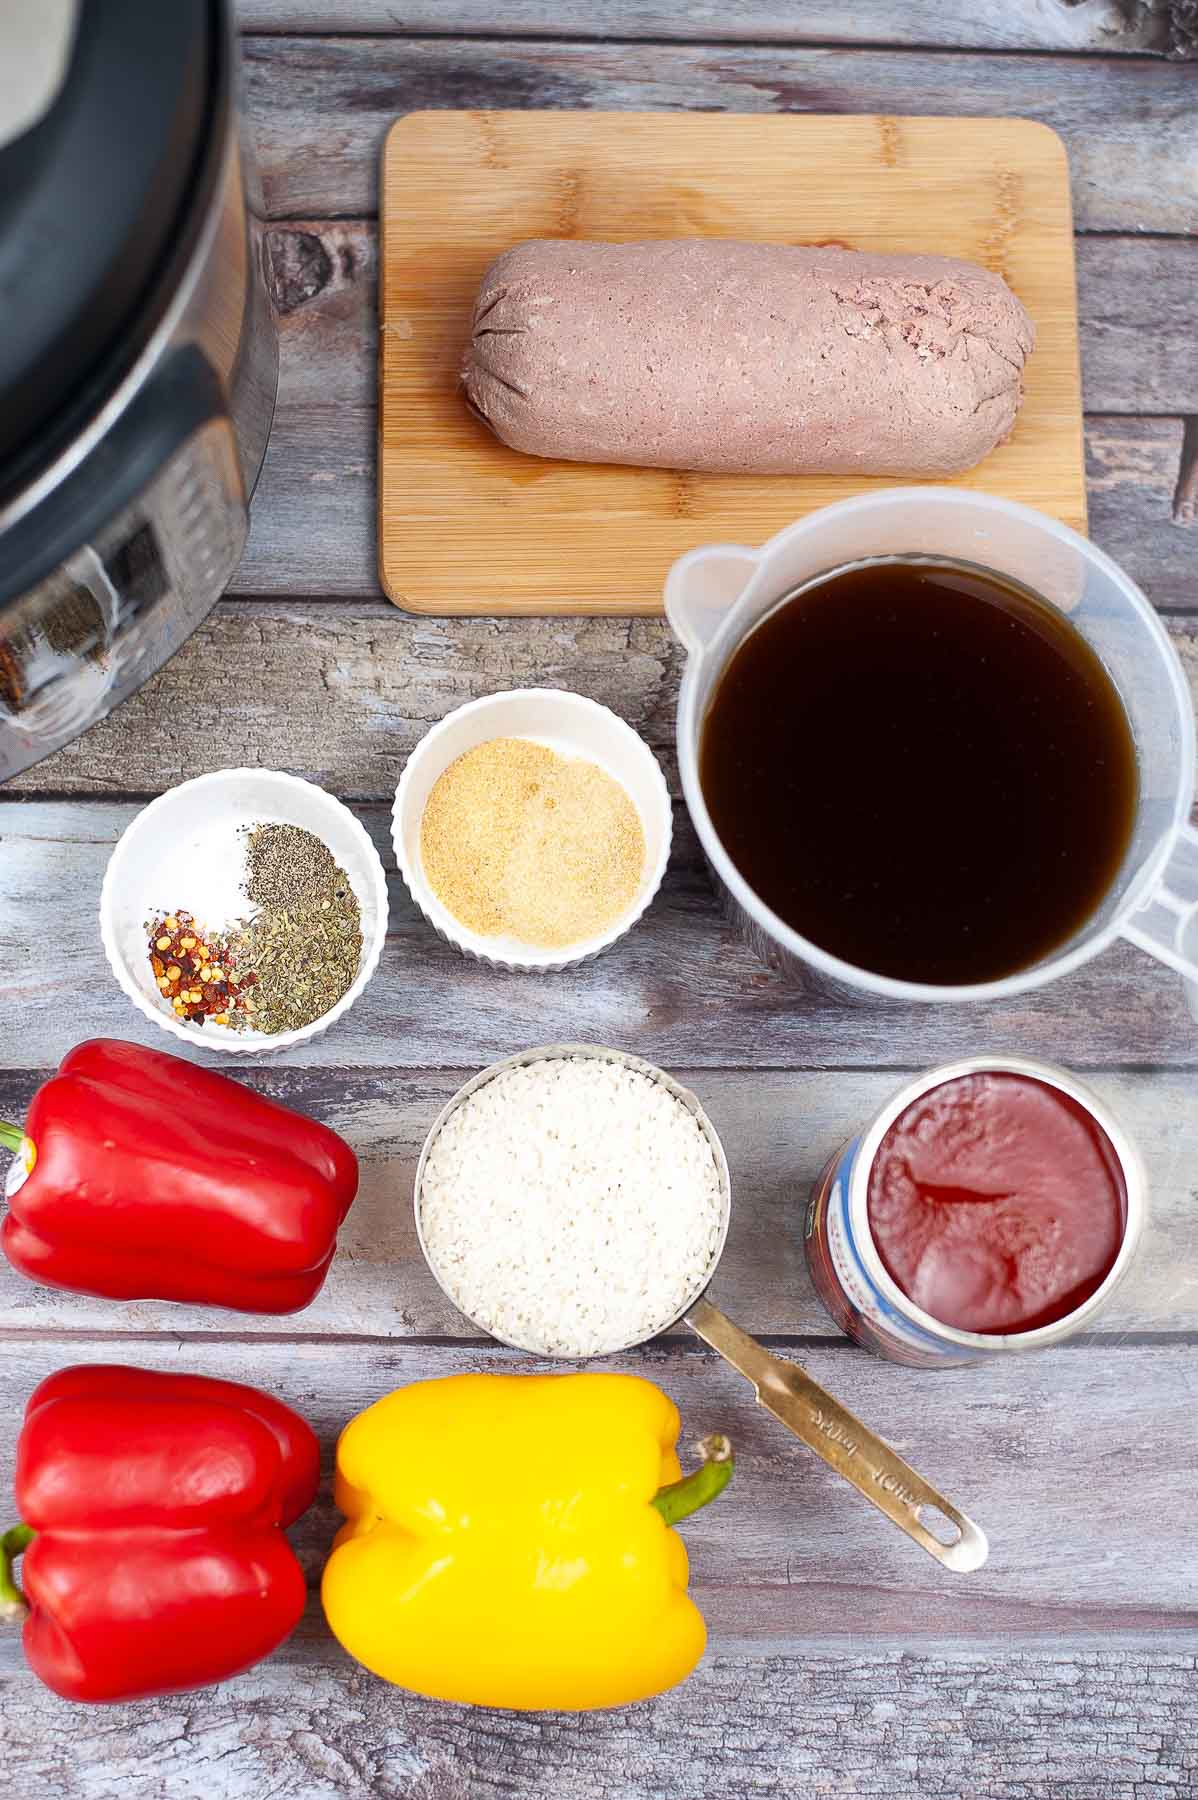 ingredients for stuffed pepper soup on a wood table - red and yellow bell pepper, cup of white rice, ground turkey, beef broth, tomato sauce and spices